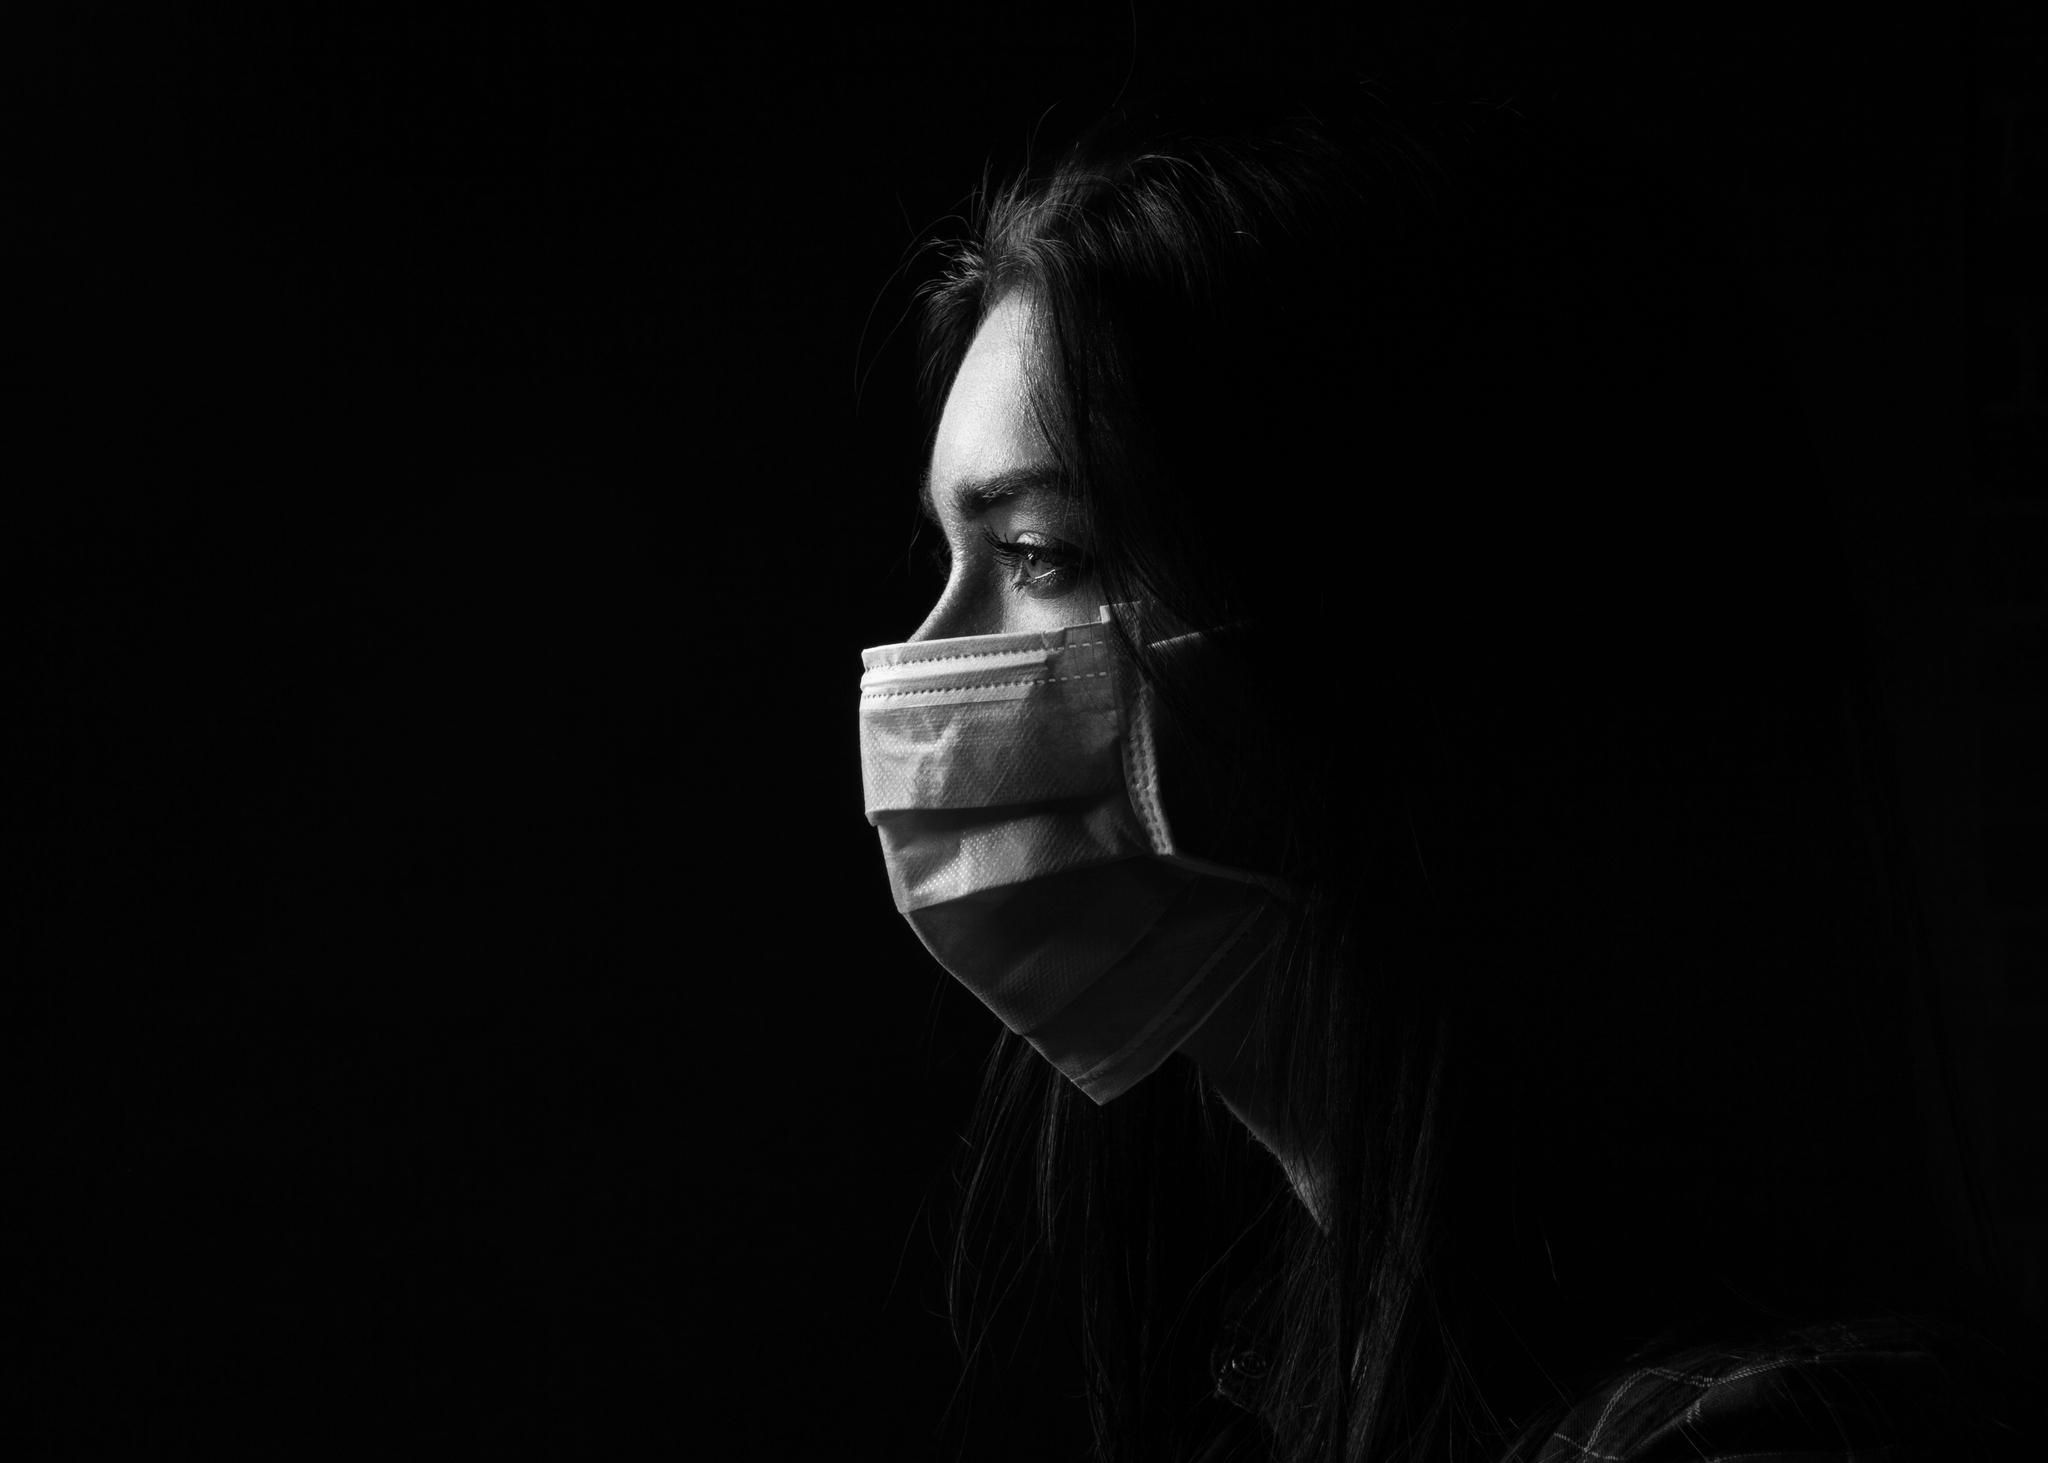 brunette girl in a protective mask on a black background